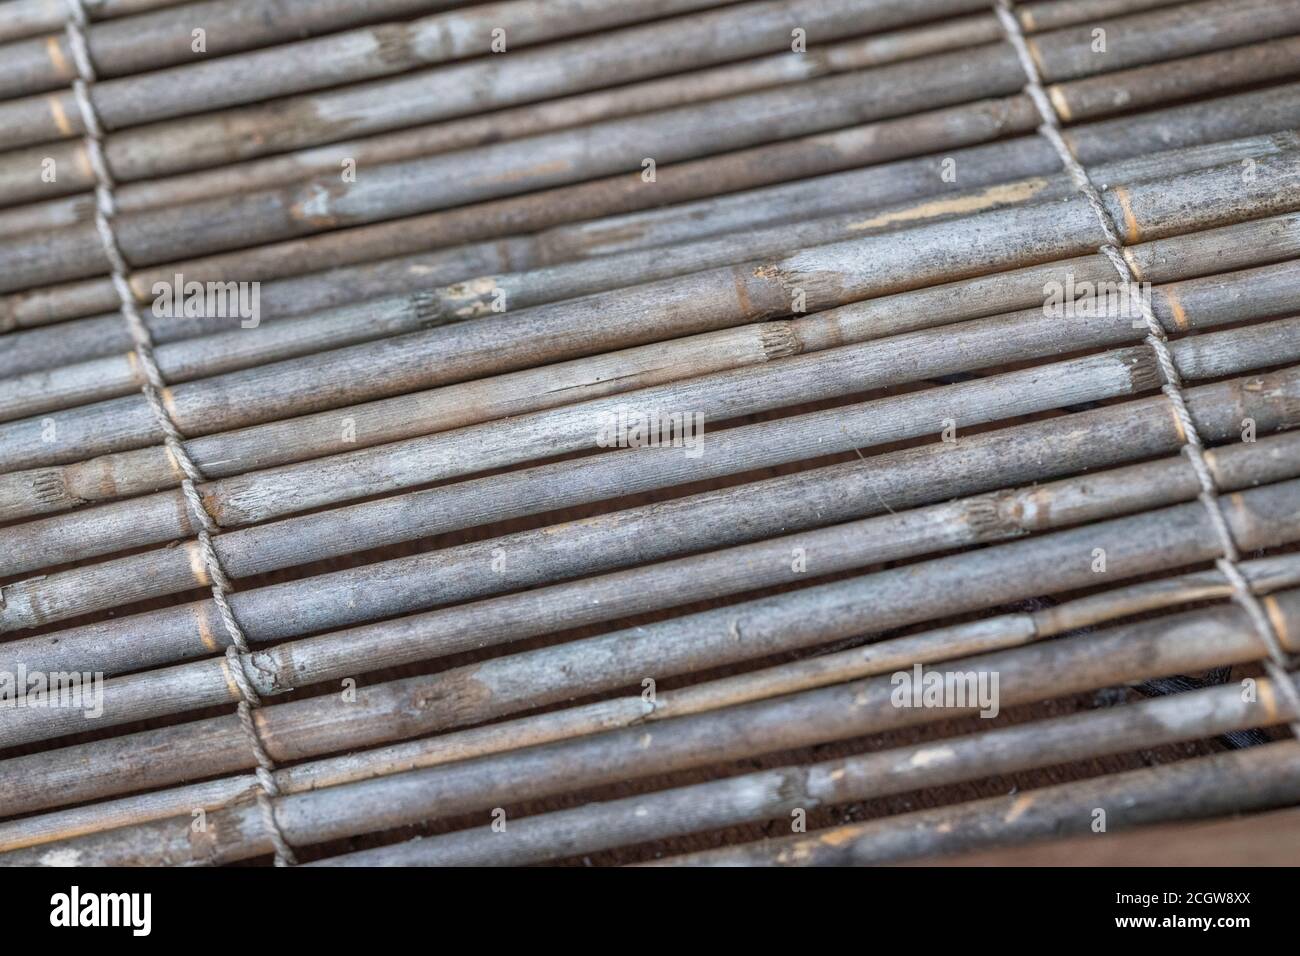 Close shot of flat section of natural reed garden screening, showing traces of reed decay. Nice natural texture background or metaphor for gardening. Stock Photo